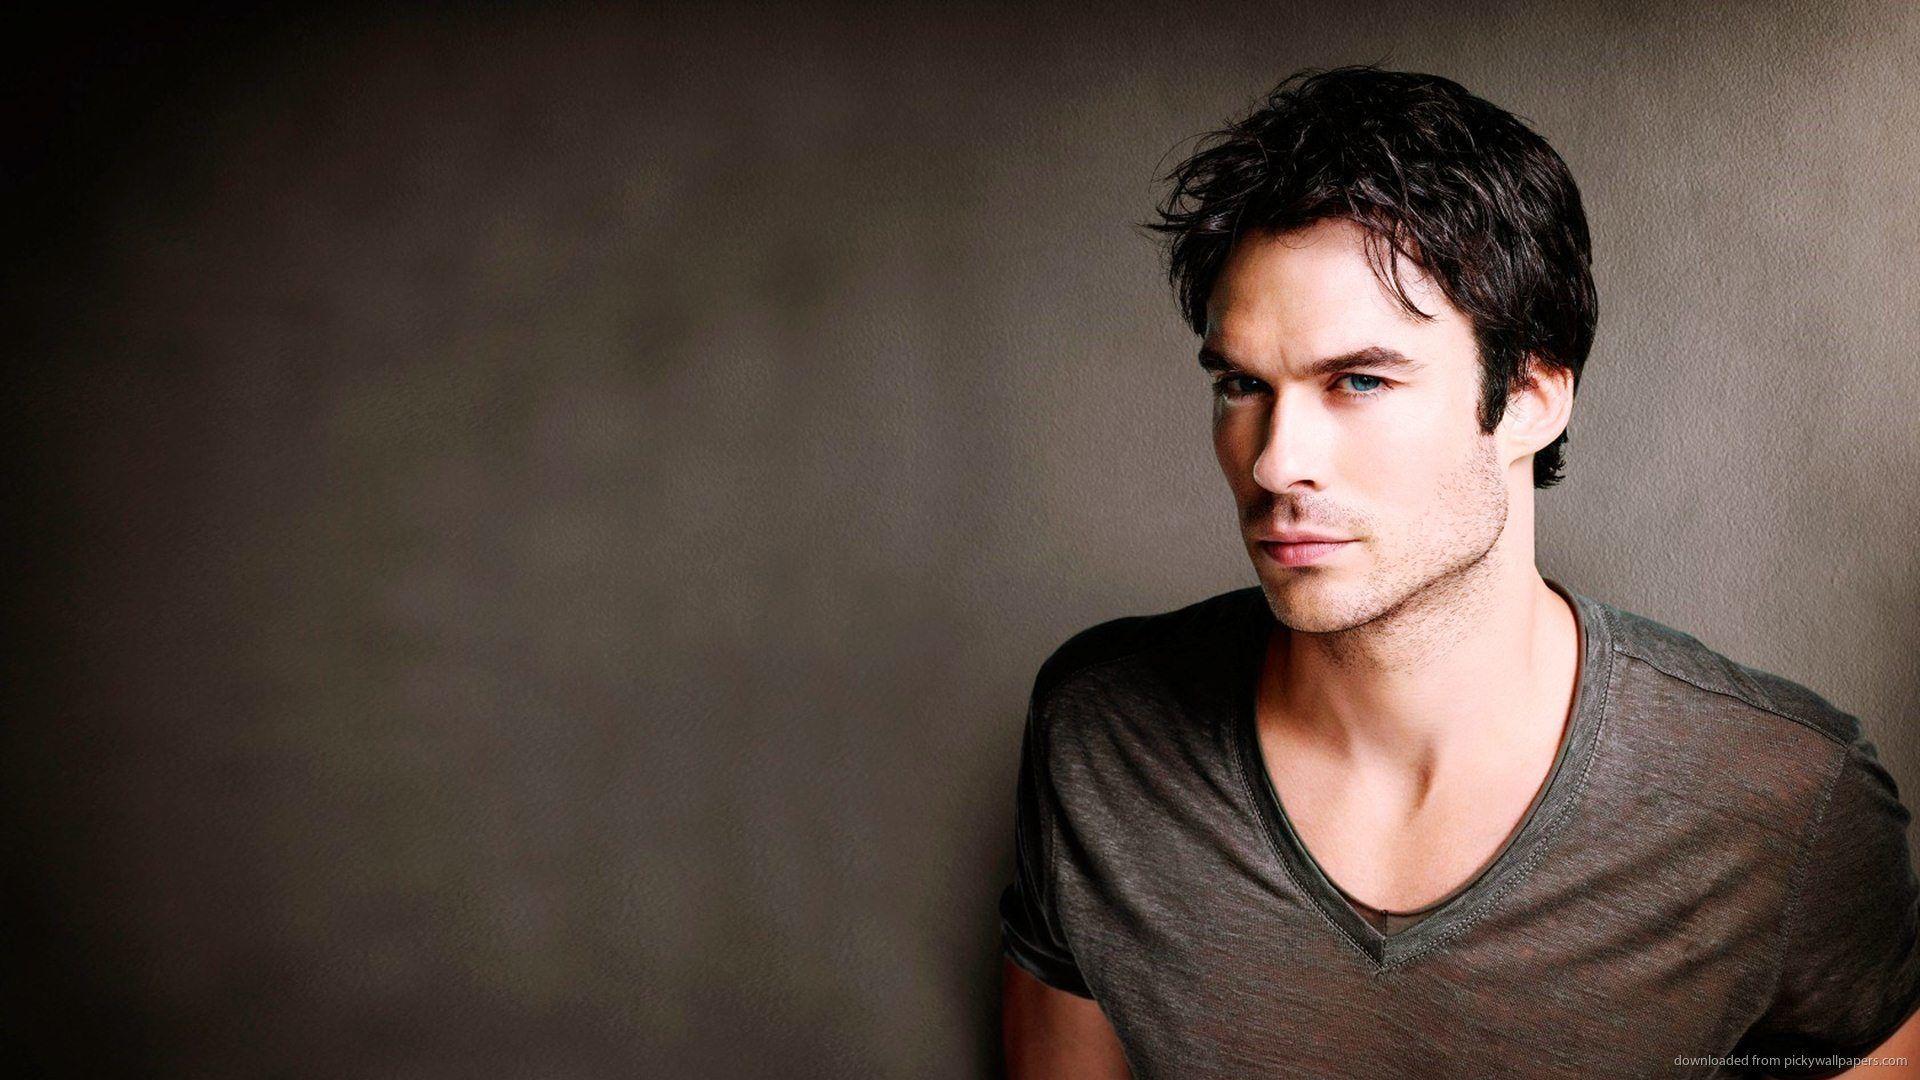 The Vampire Diaries Ian Somerhalder Wallpaper Picture For iPhone